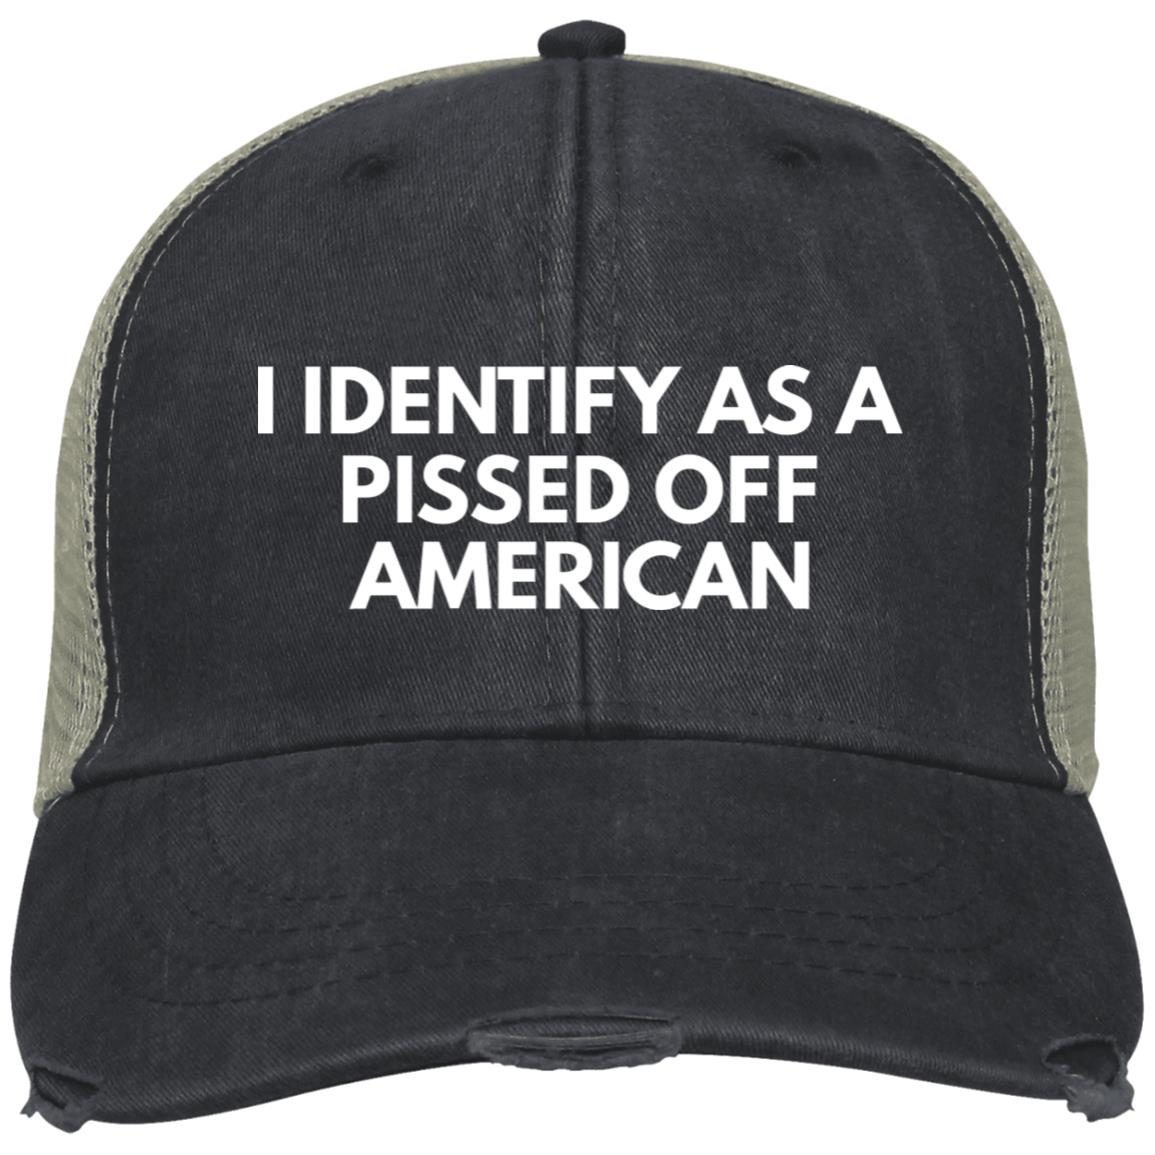 I Identify As A Pissed Off American Embroidered Hat Cap 1